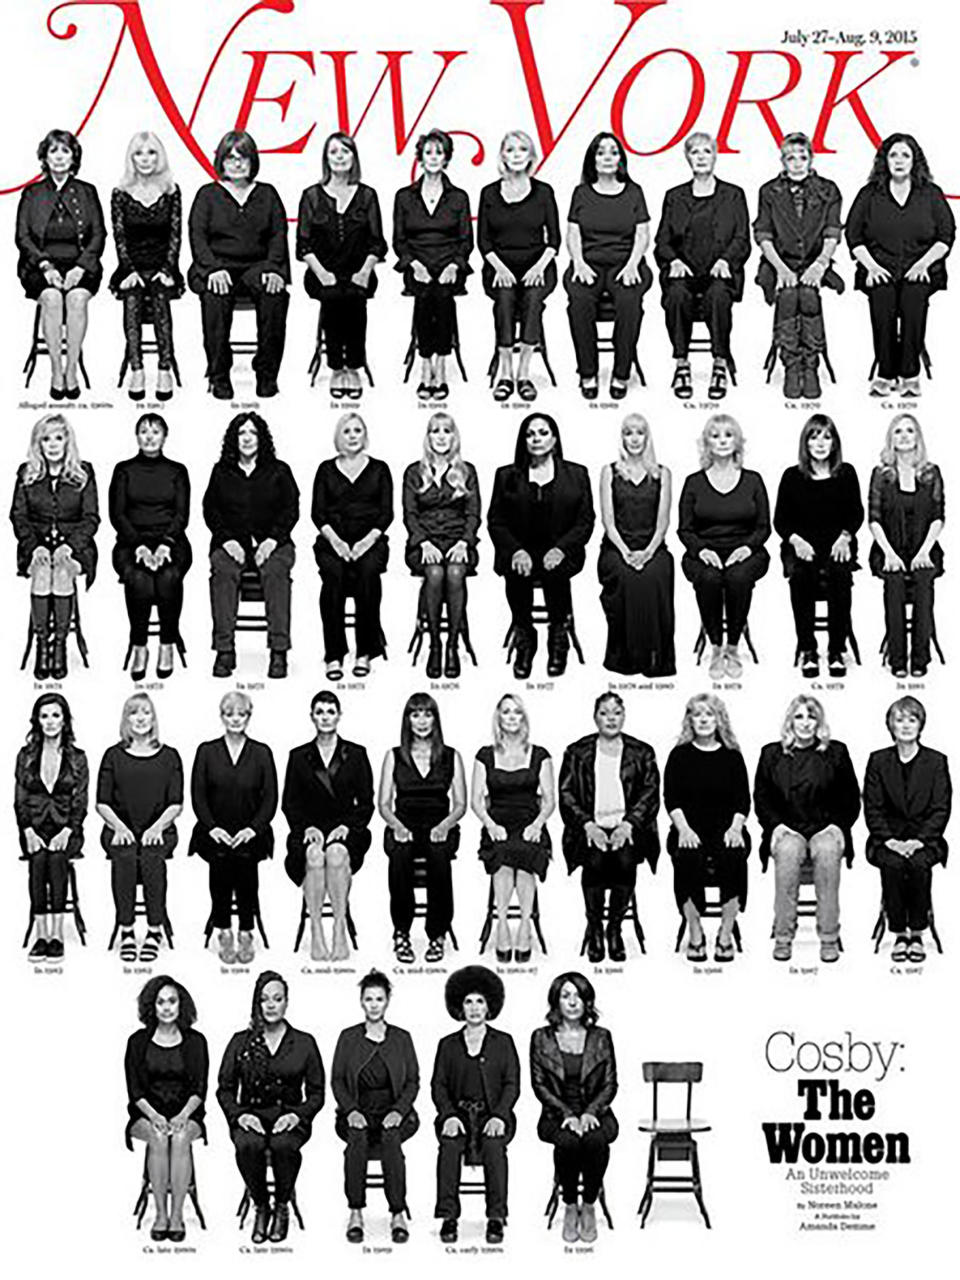 More than 30 women have accused American comedy icon&nbsp;Bill Cosby of sexual assault, and New York Magazine's powerful cover photo gave a haunting reminder that there are likely more. On a&nbsp;July, 2016 cover, 35 of his accusers stare back at the reader -- with one empty chair remaining&nbsp;unfilled.